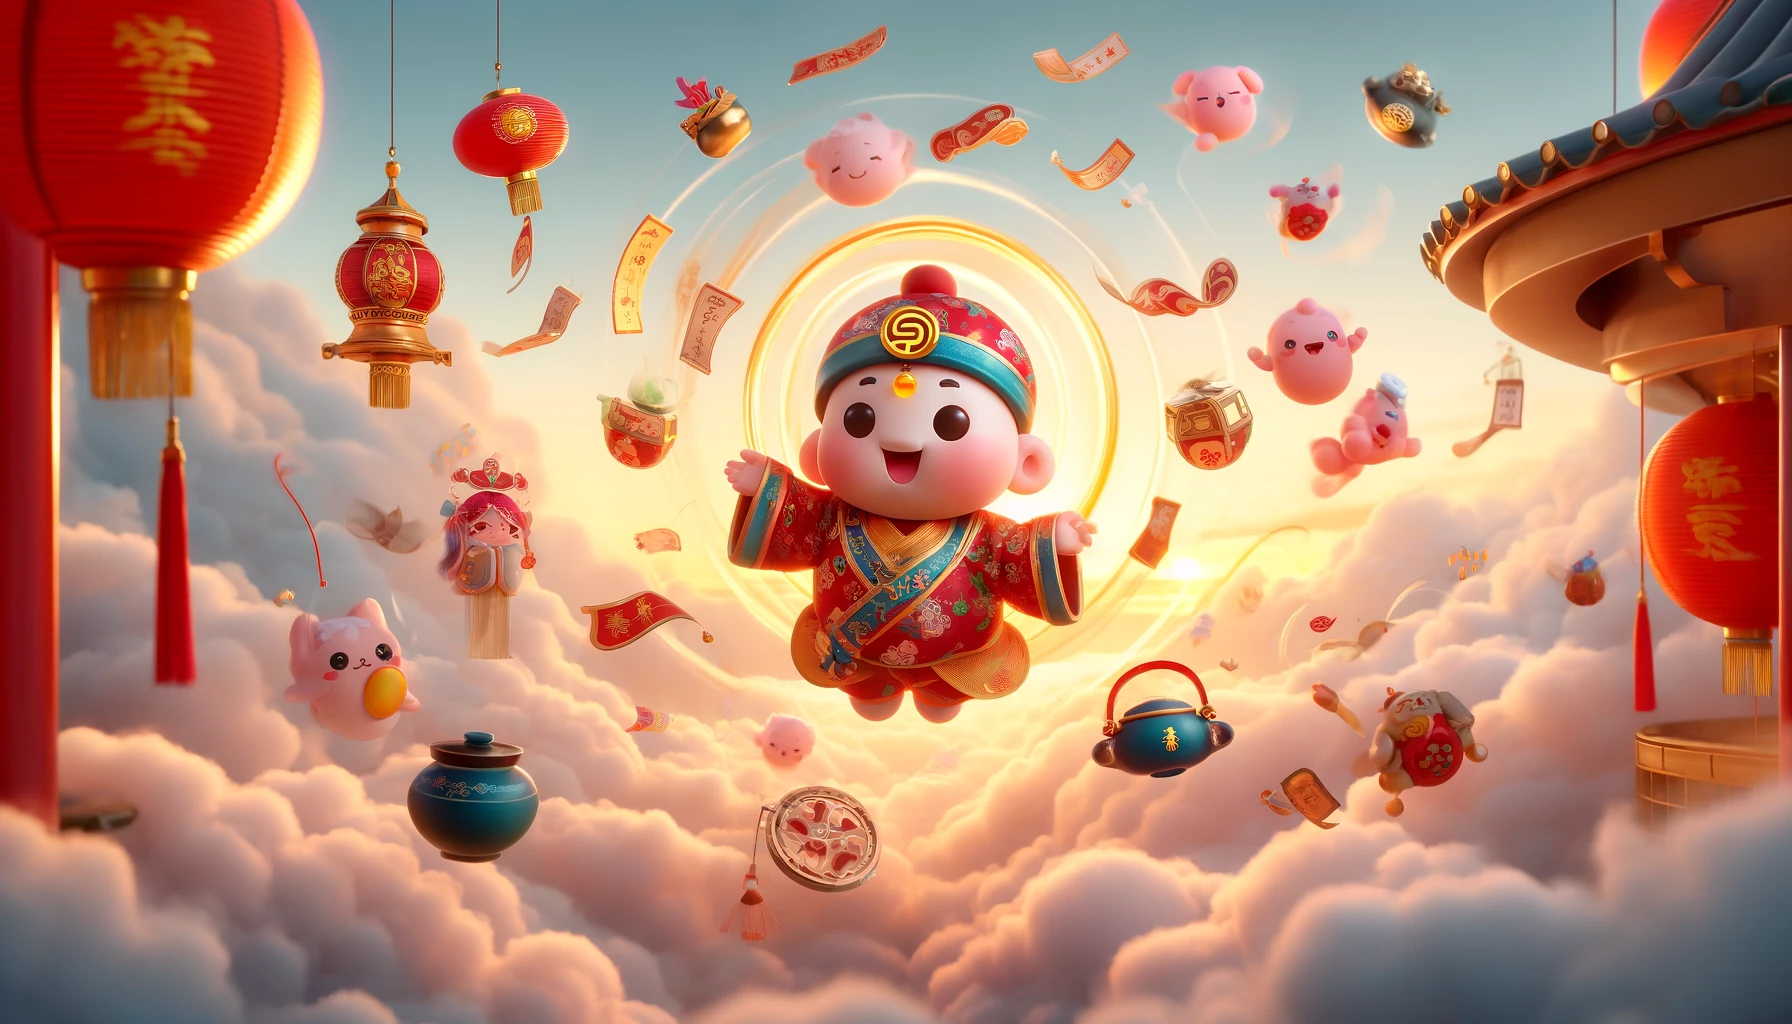 A whimsical scene featuring a cute baby Jiangshi levitating and using telekinesis. The baby Jiangshi, with a joyful expression, is floating in the air amidst fluffy clouds, surrounded by a swirl of colorful traditional Chinese items like lanterns, scrolls, and teapots, all floating around as if moved by its powers. The baby Jiangshi wears a vibrant red and gold robe, and its yellow talisman flutters slightly from its forehead. The background is a serene sky during sunset, casting a warm glow over the entire whimsical scene. This image is captured in a wide format, emphasizing the magical and buoyant atmosphere.